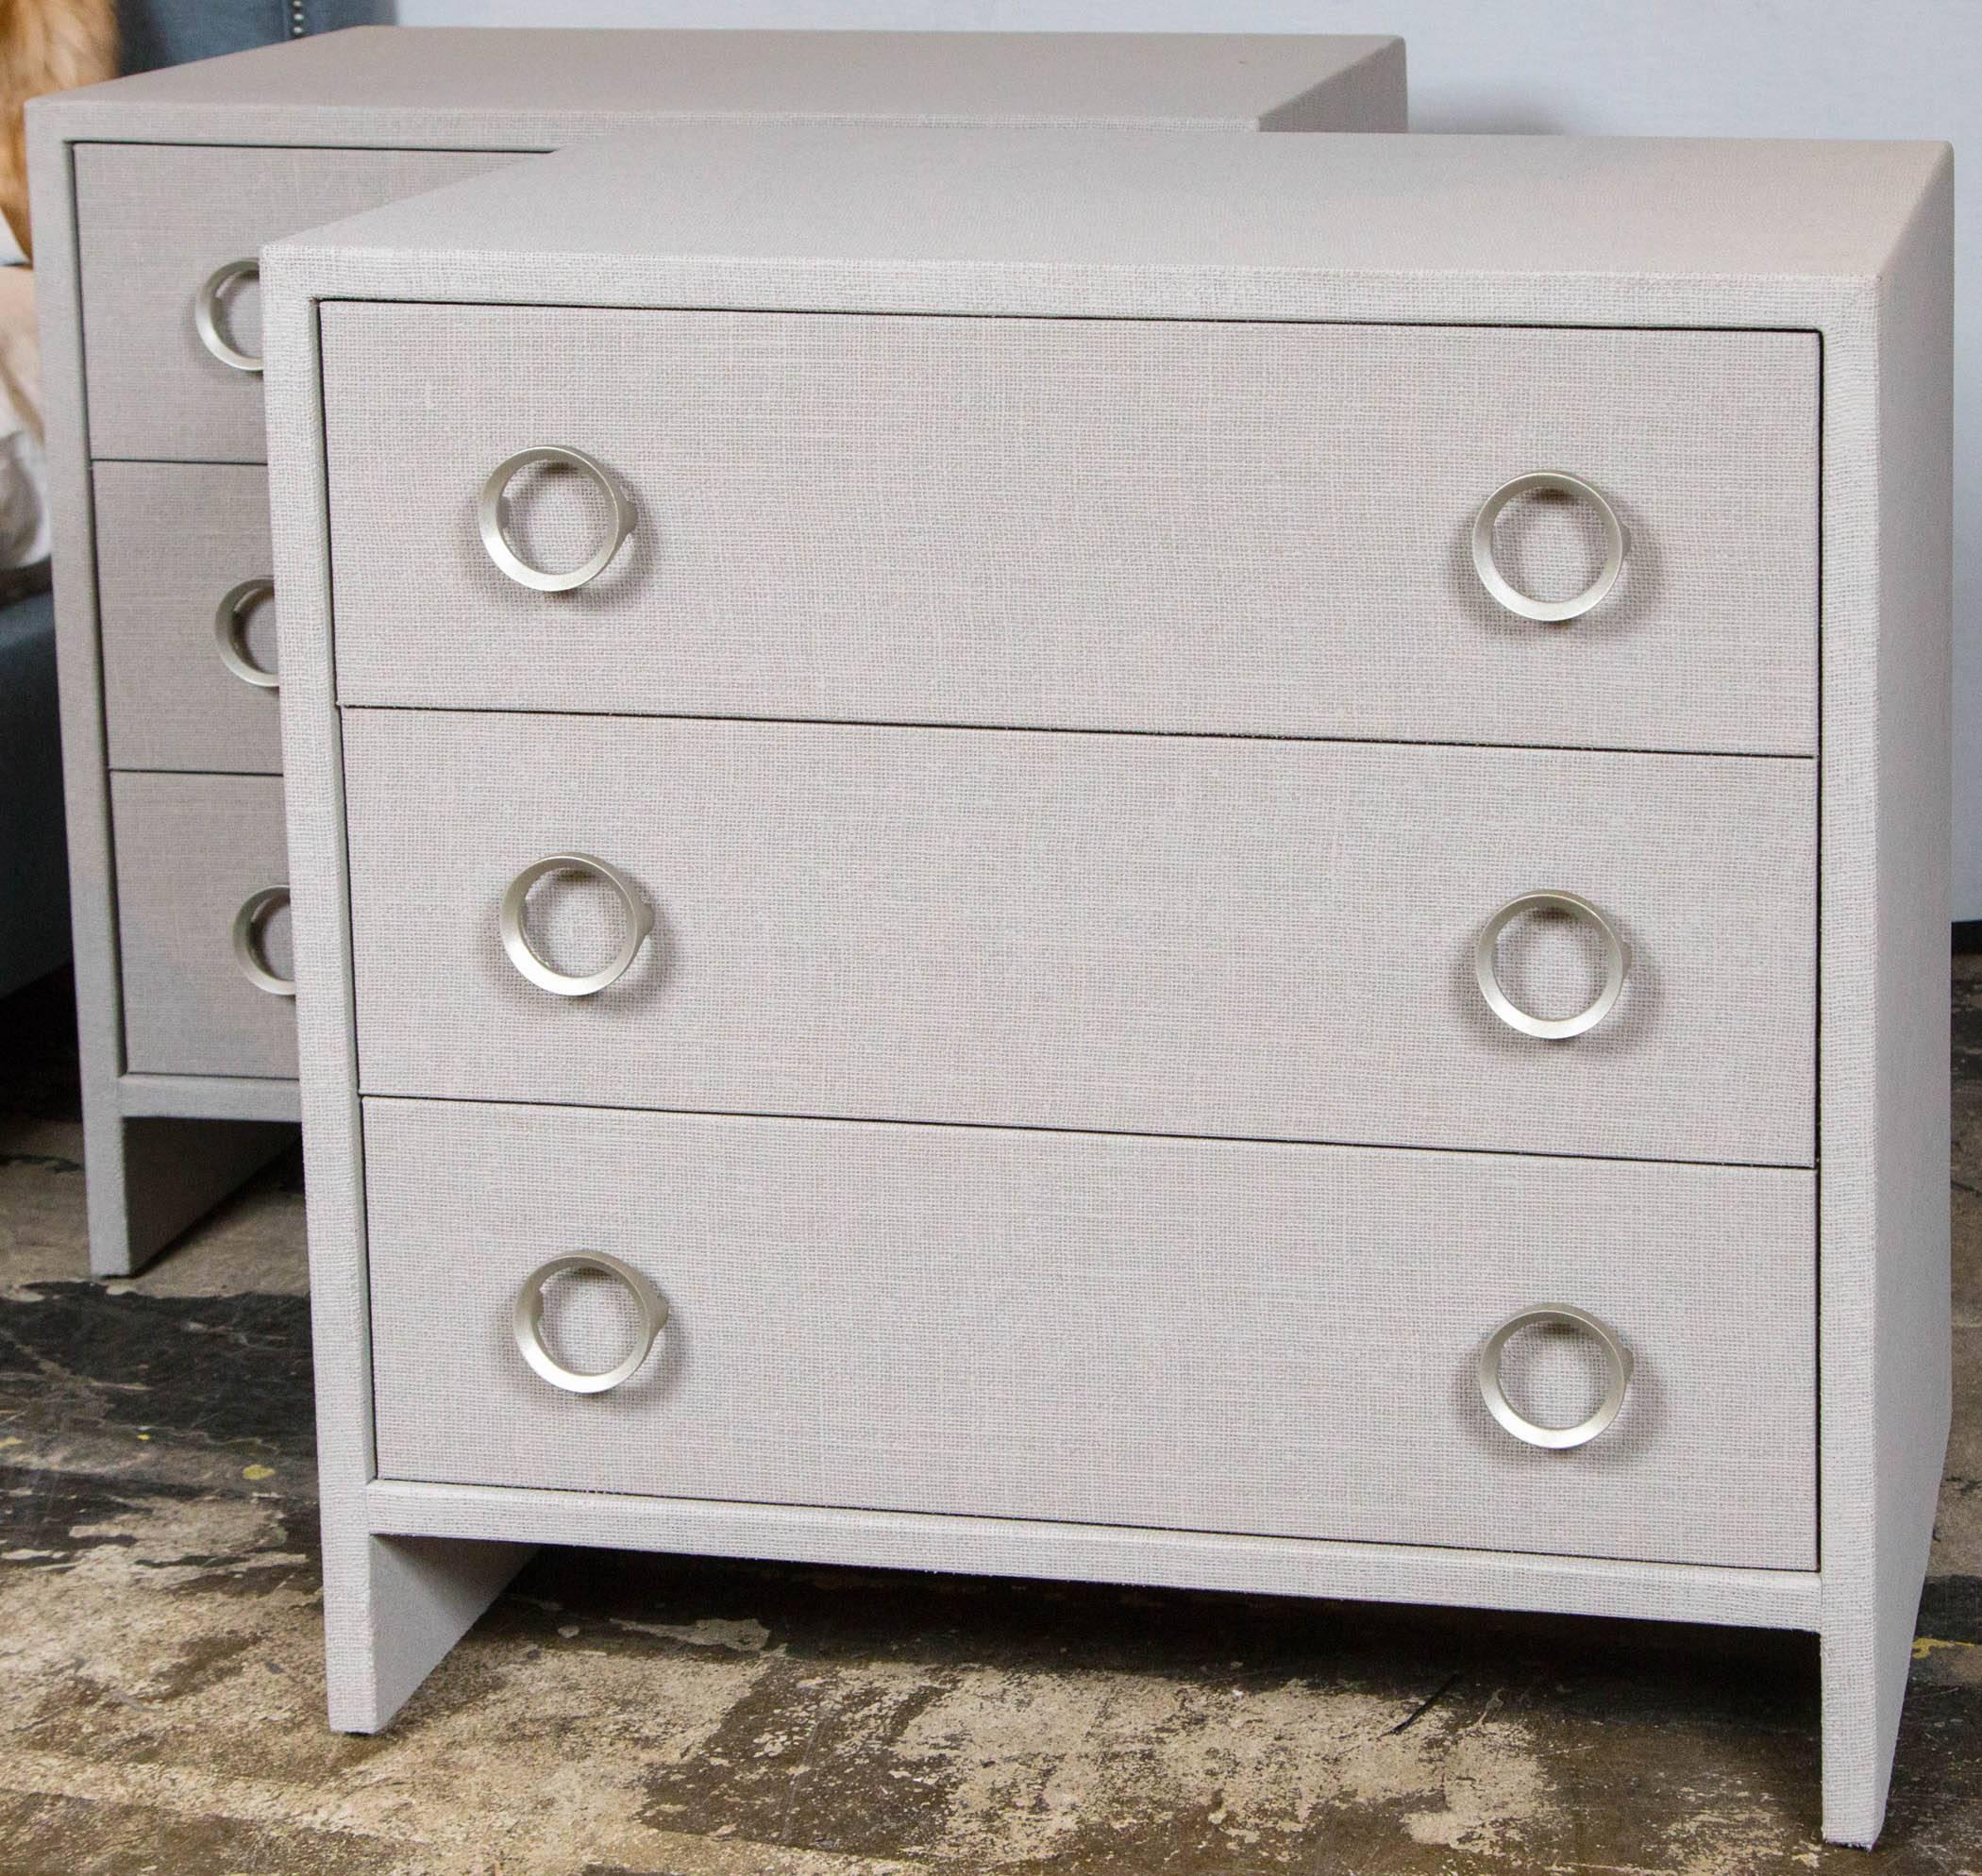 Three-drawer dresser wrapped in linen painted grey with silver leaf hardware.